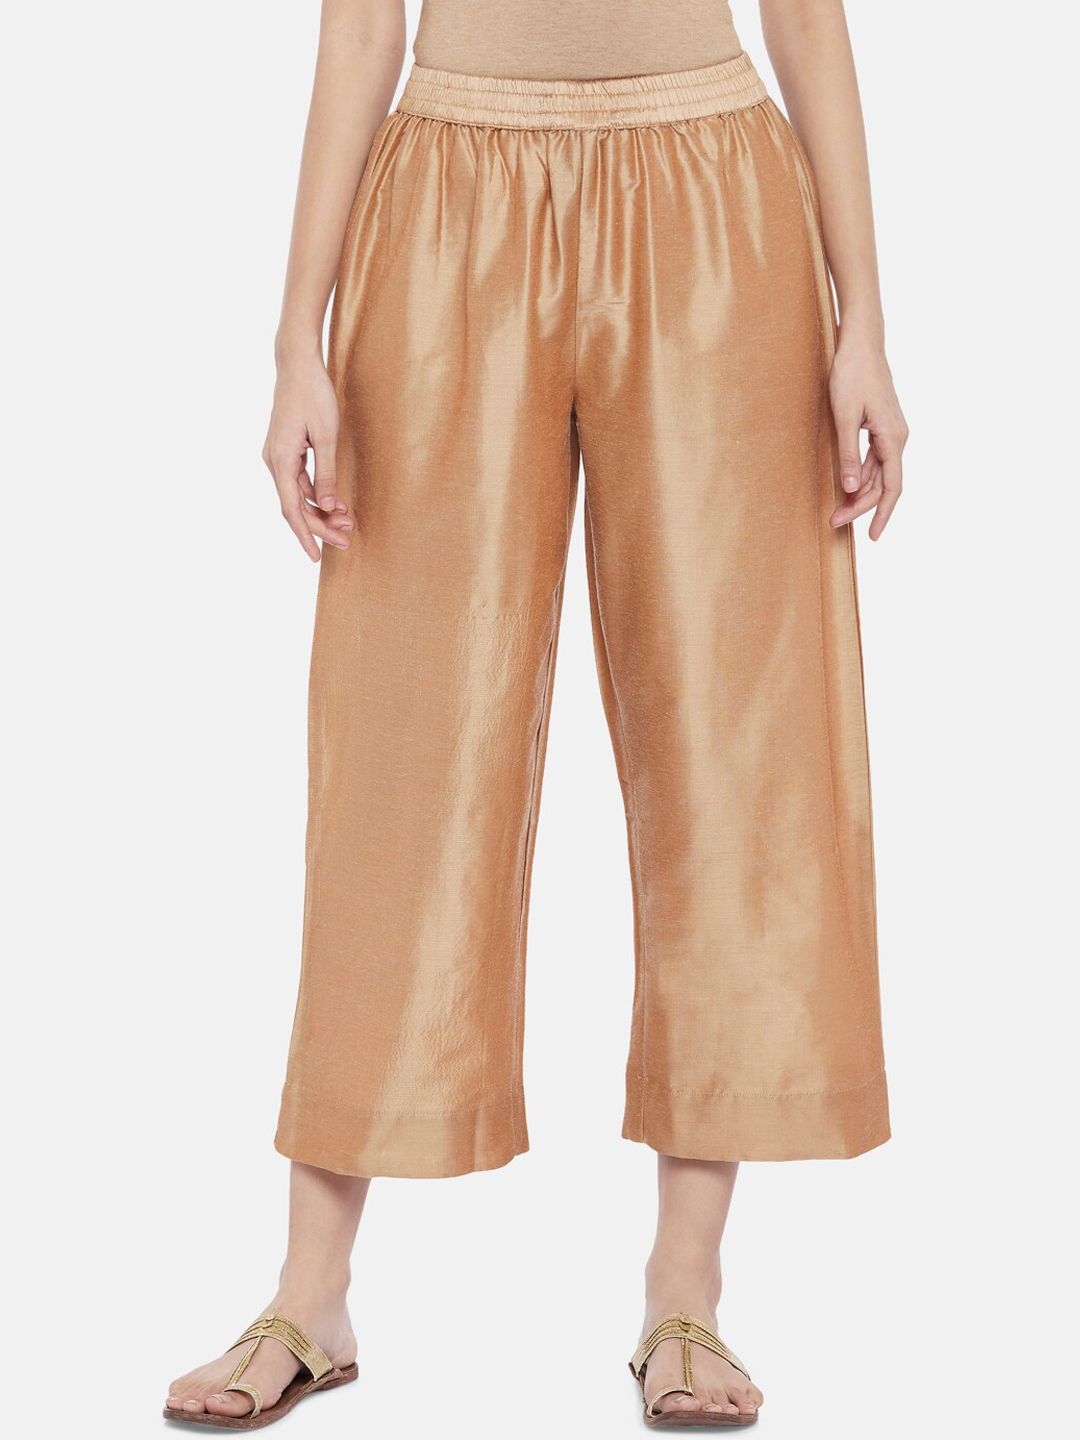 RANGMANCH BY PANTALOONS Woman Gold-Toned Culottes Trousers Price in India